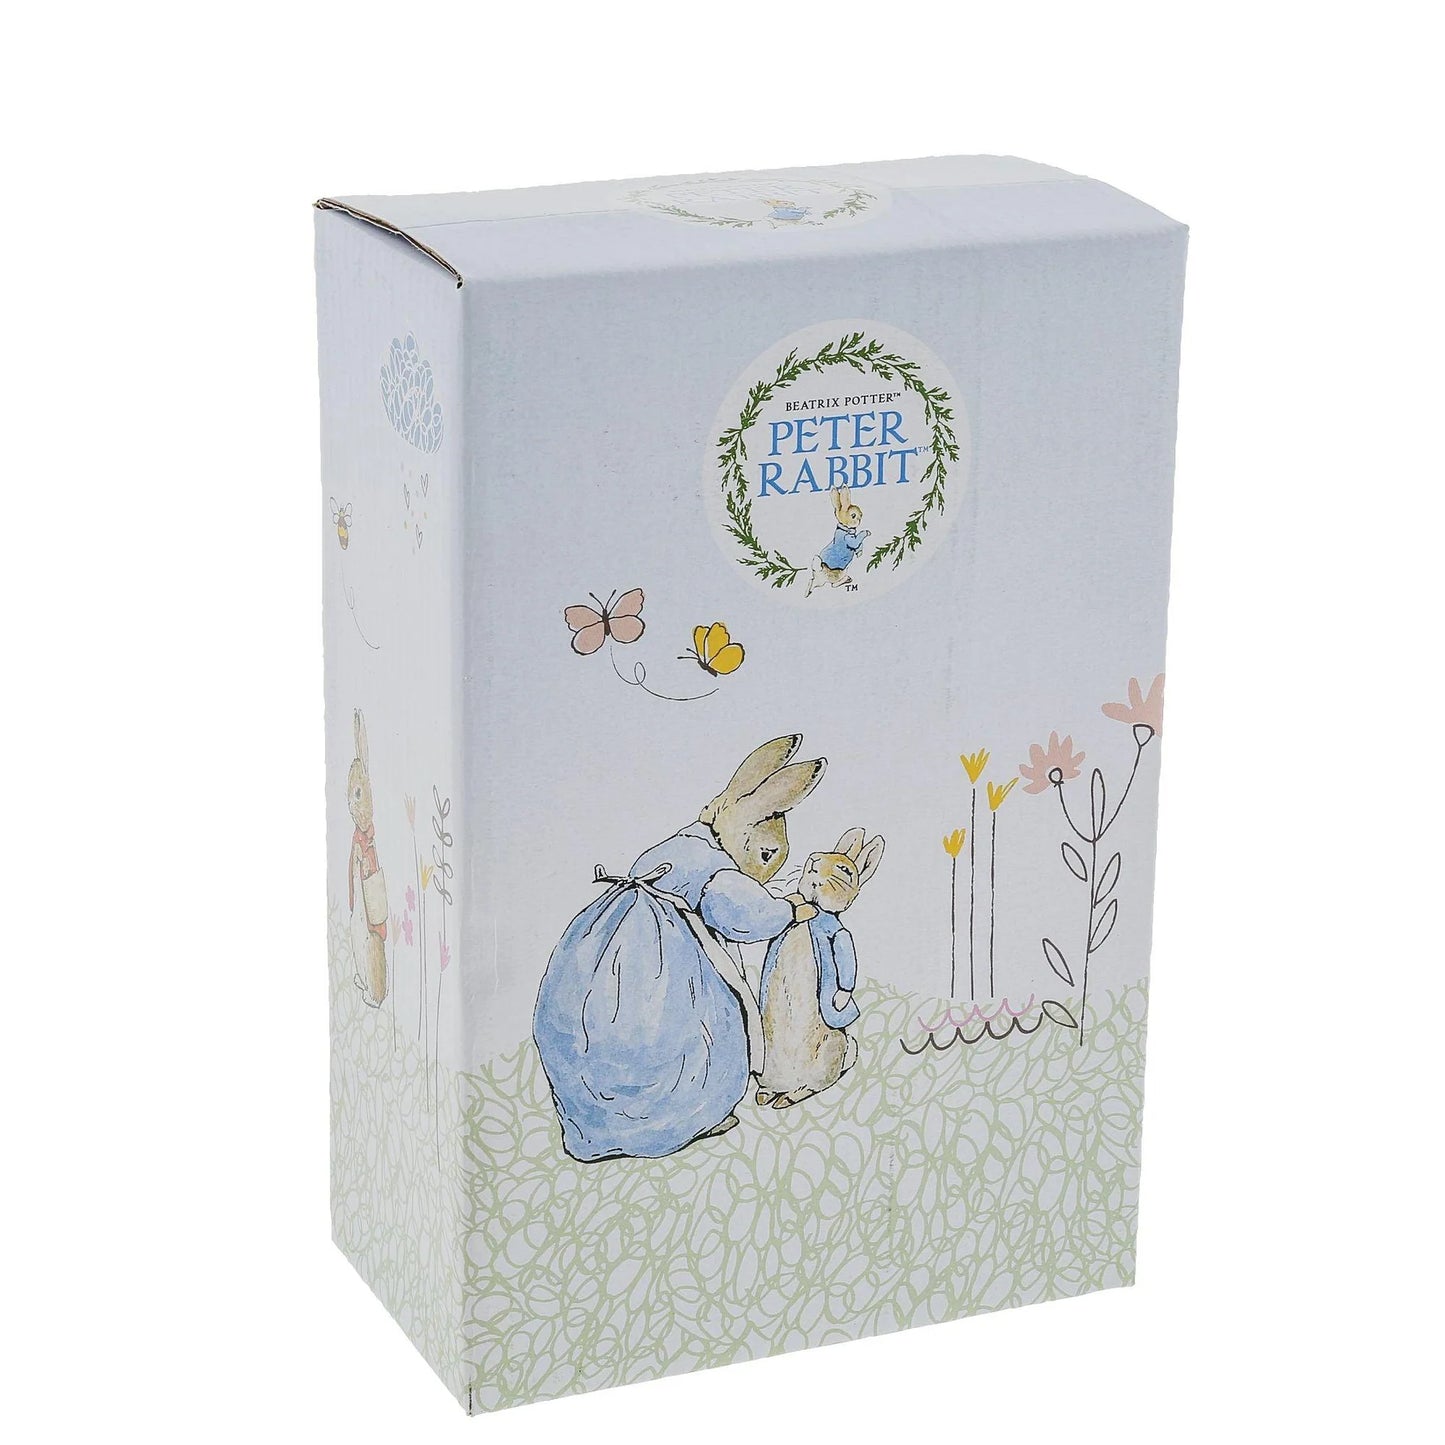 The Tale of Peter Rabbit Money Bank by Beatrix Potter